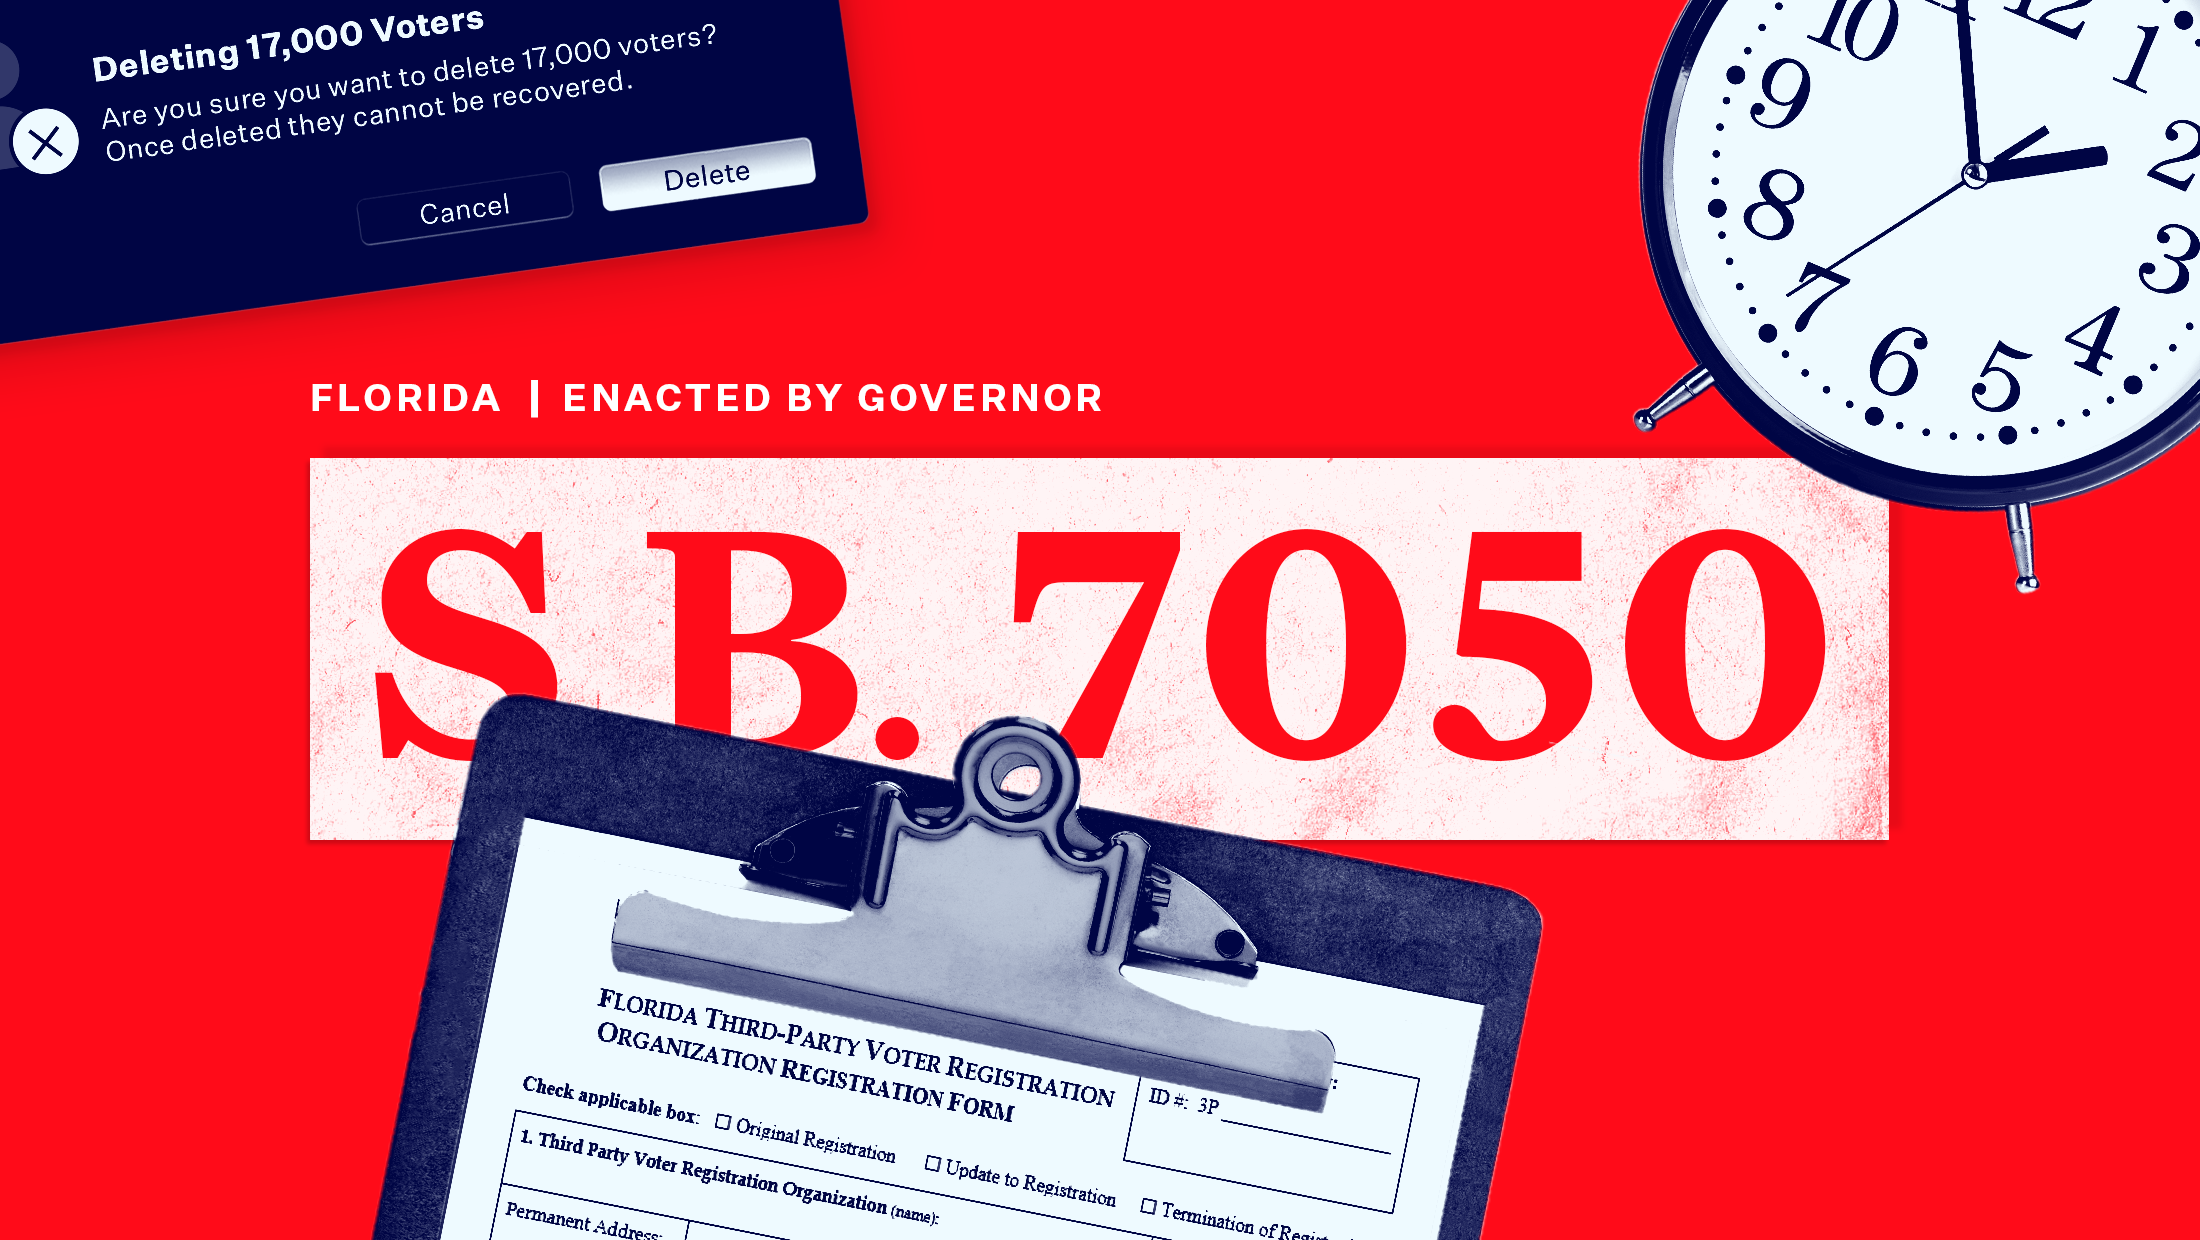 Text on a red background that says "FLORIDA | ENACTED BY GOVERNOR S.B. 7050 surrounded by a third party voter registration form on a clipboard, a clock and a computer window warning message about deleting 17,000 voters.